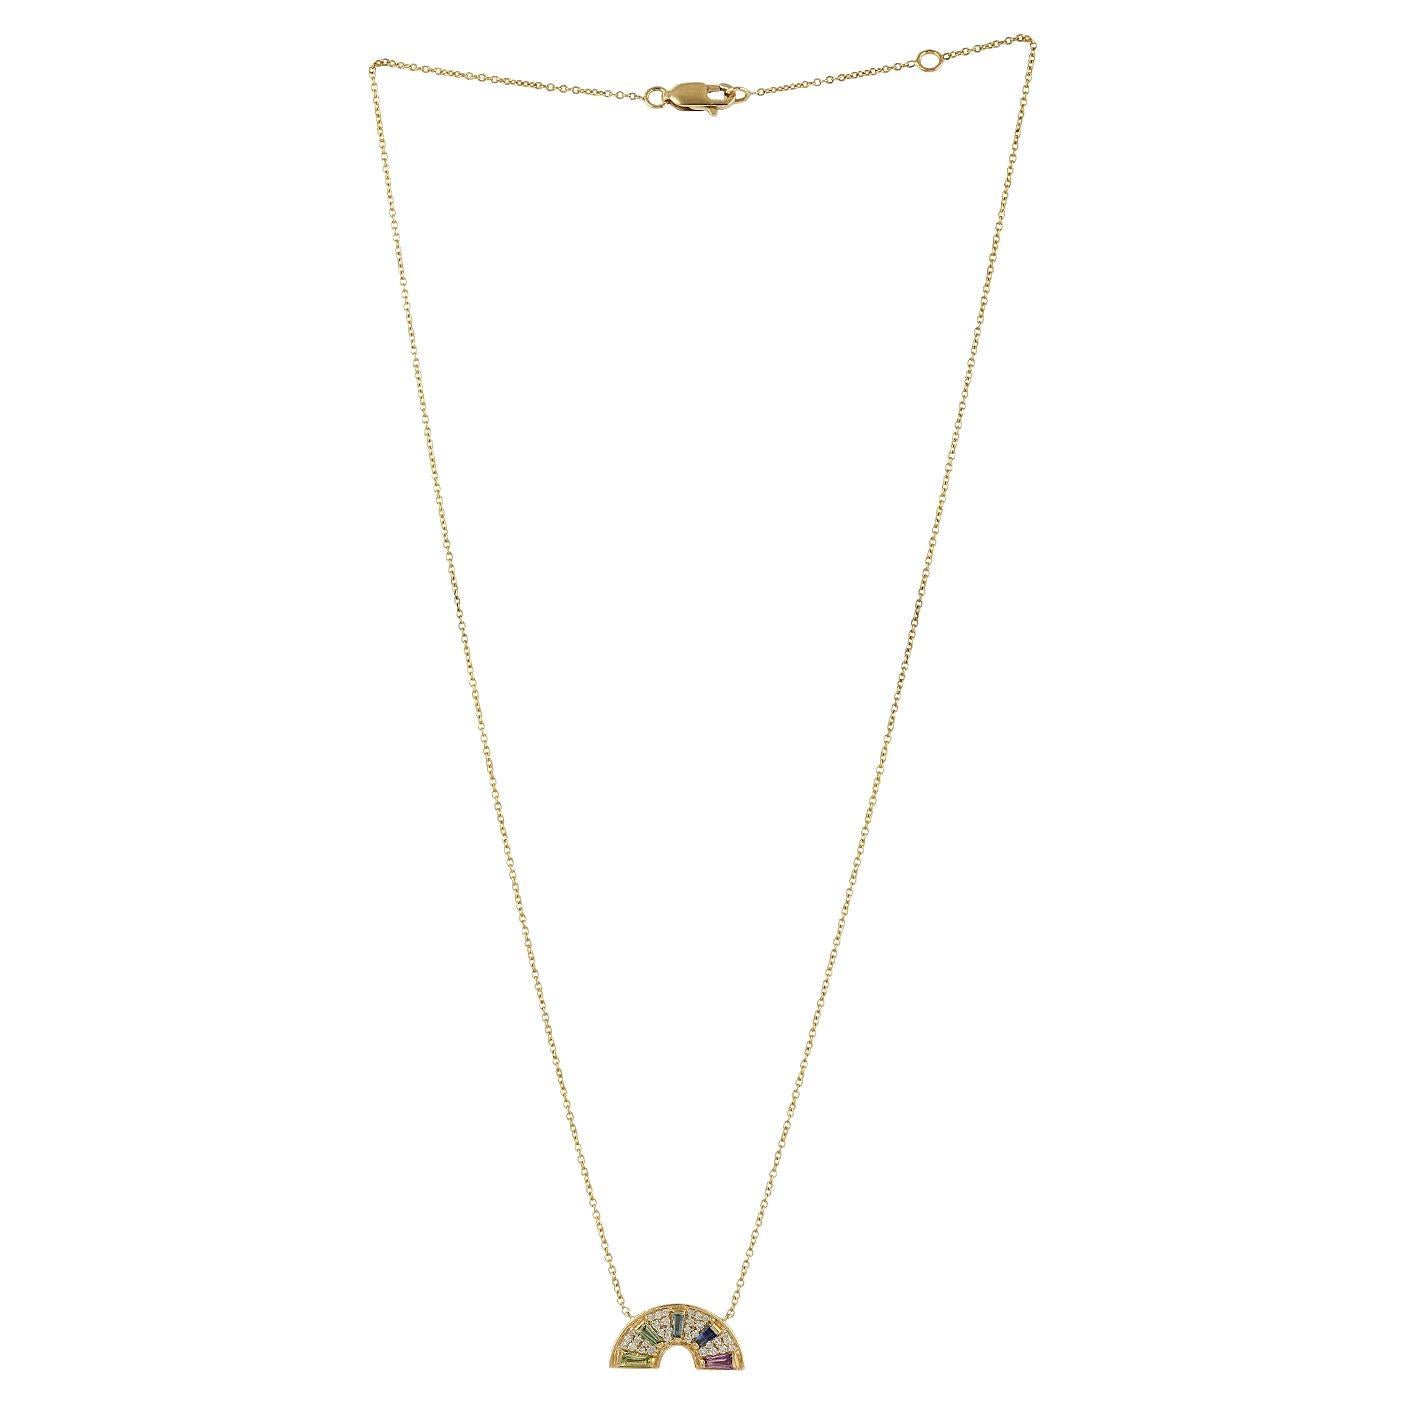 Baguette Multi Gemstone & Diamond Pendant Chain Necklace Made In 18k Yellow Gold For Sale